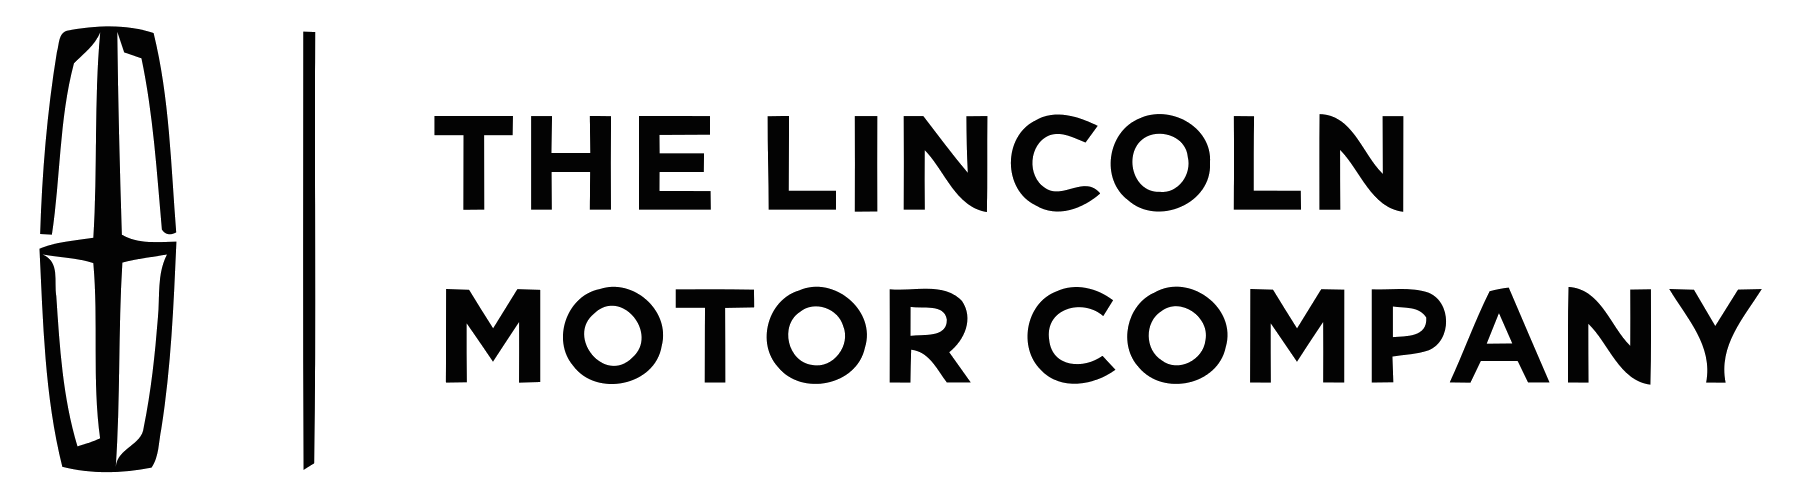 Lincoln Logo - Lincoln Logo, Lincoln Car Symbol Meaning and History. Car Brand